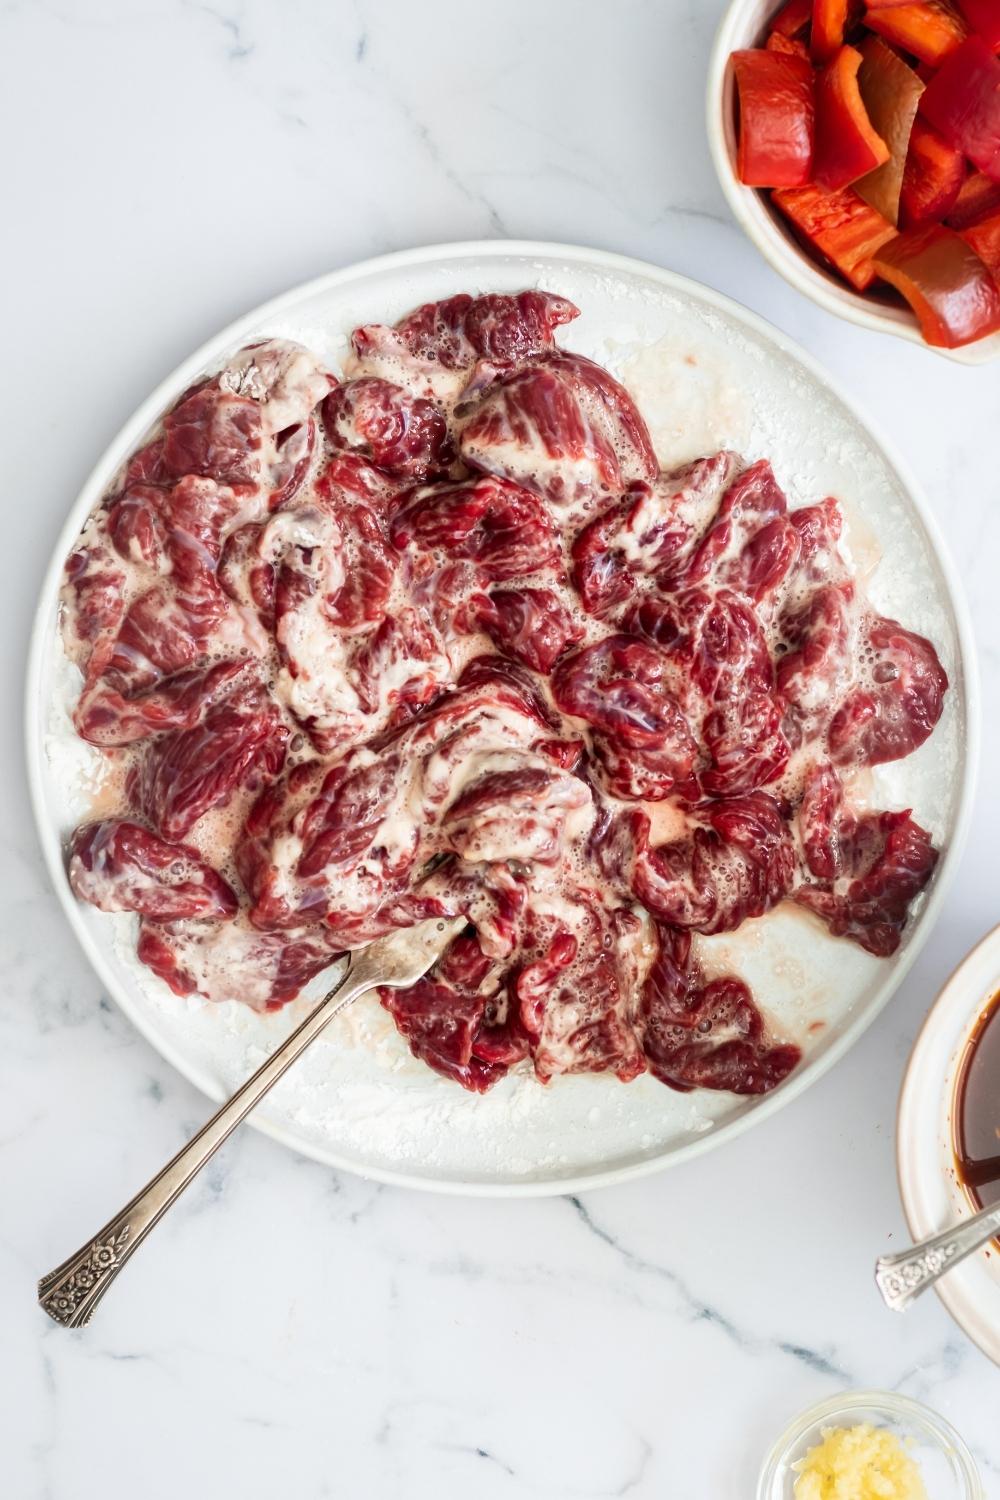 An overhead view of sliced beef that has been mixed with cornstarch, egg white, and salt.